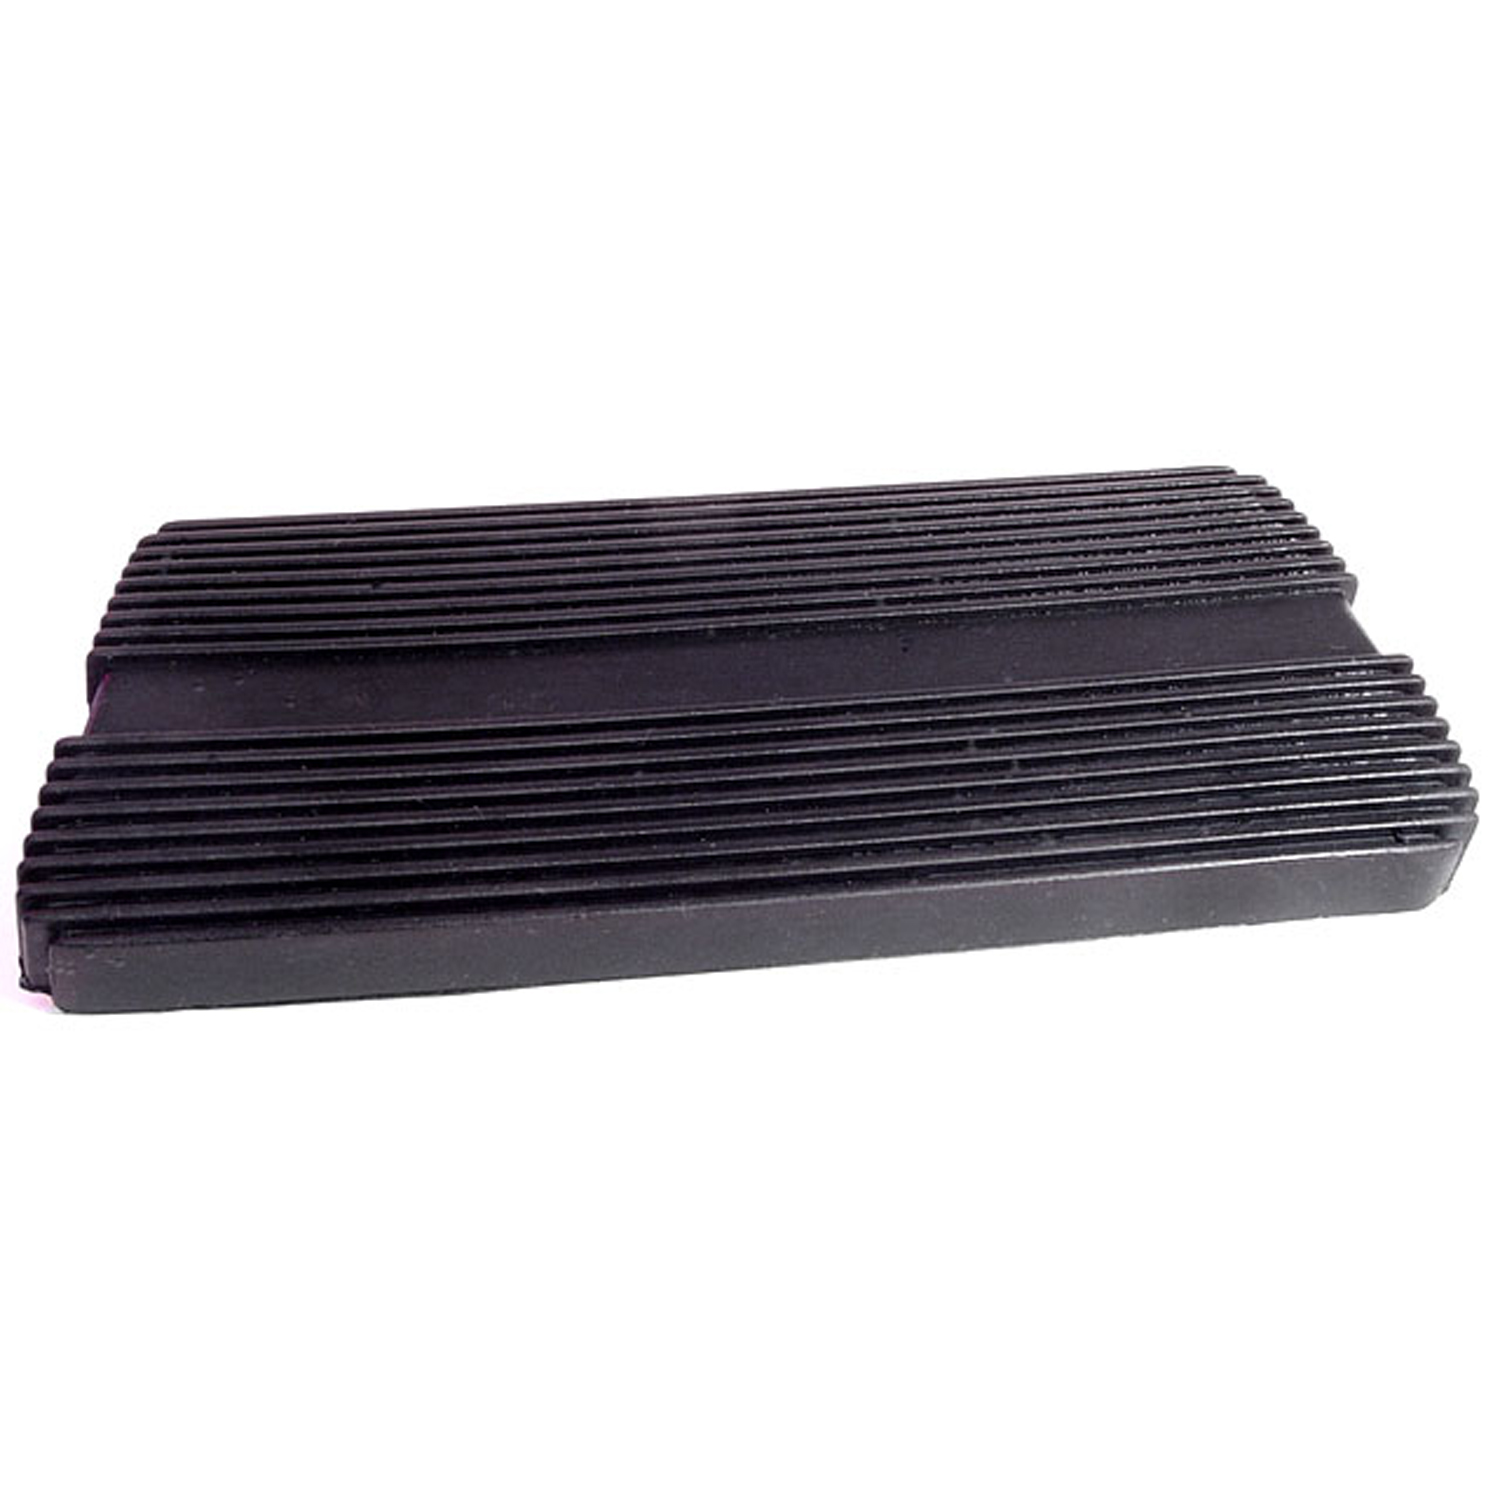 1964 Buick Riviera Power Brake Pedal Pad, Black.  Made in curved configuration-CB 83-H